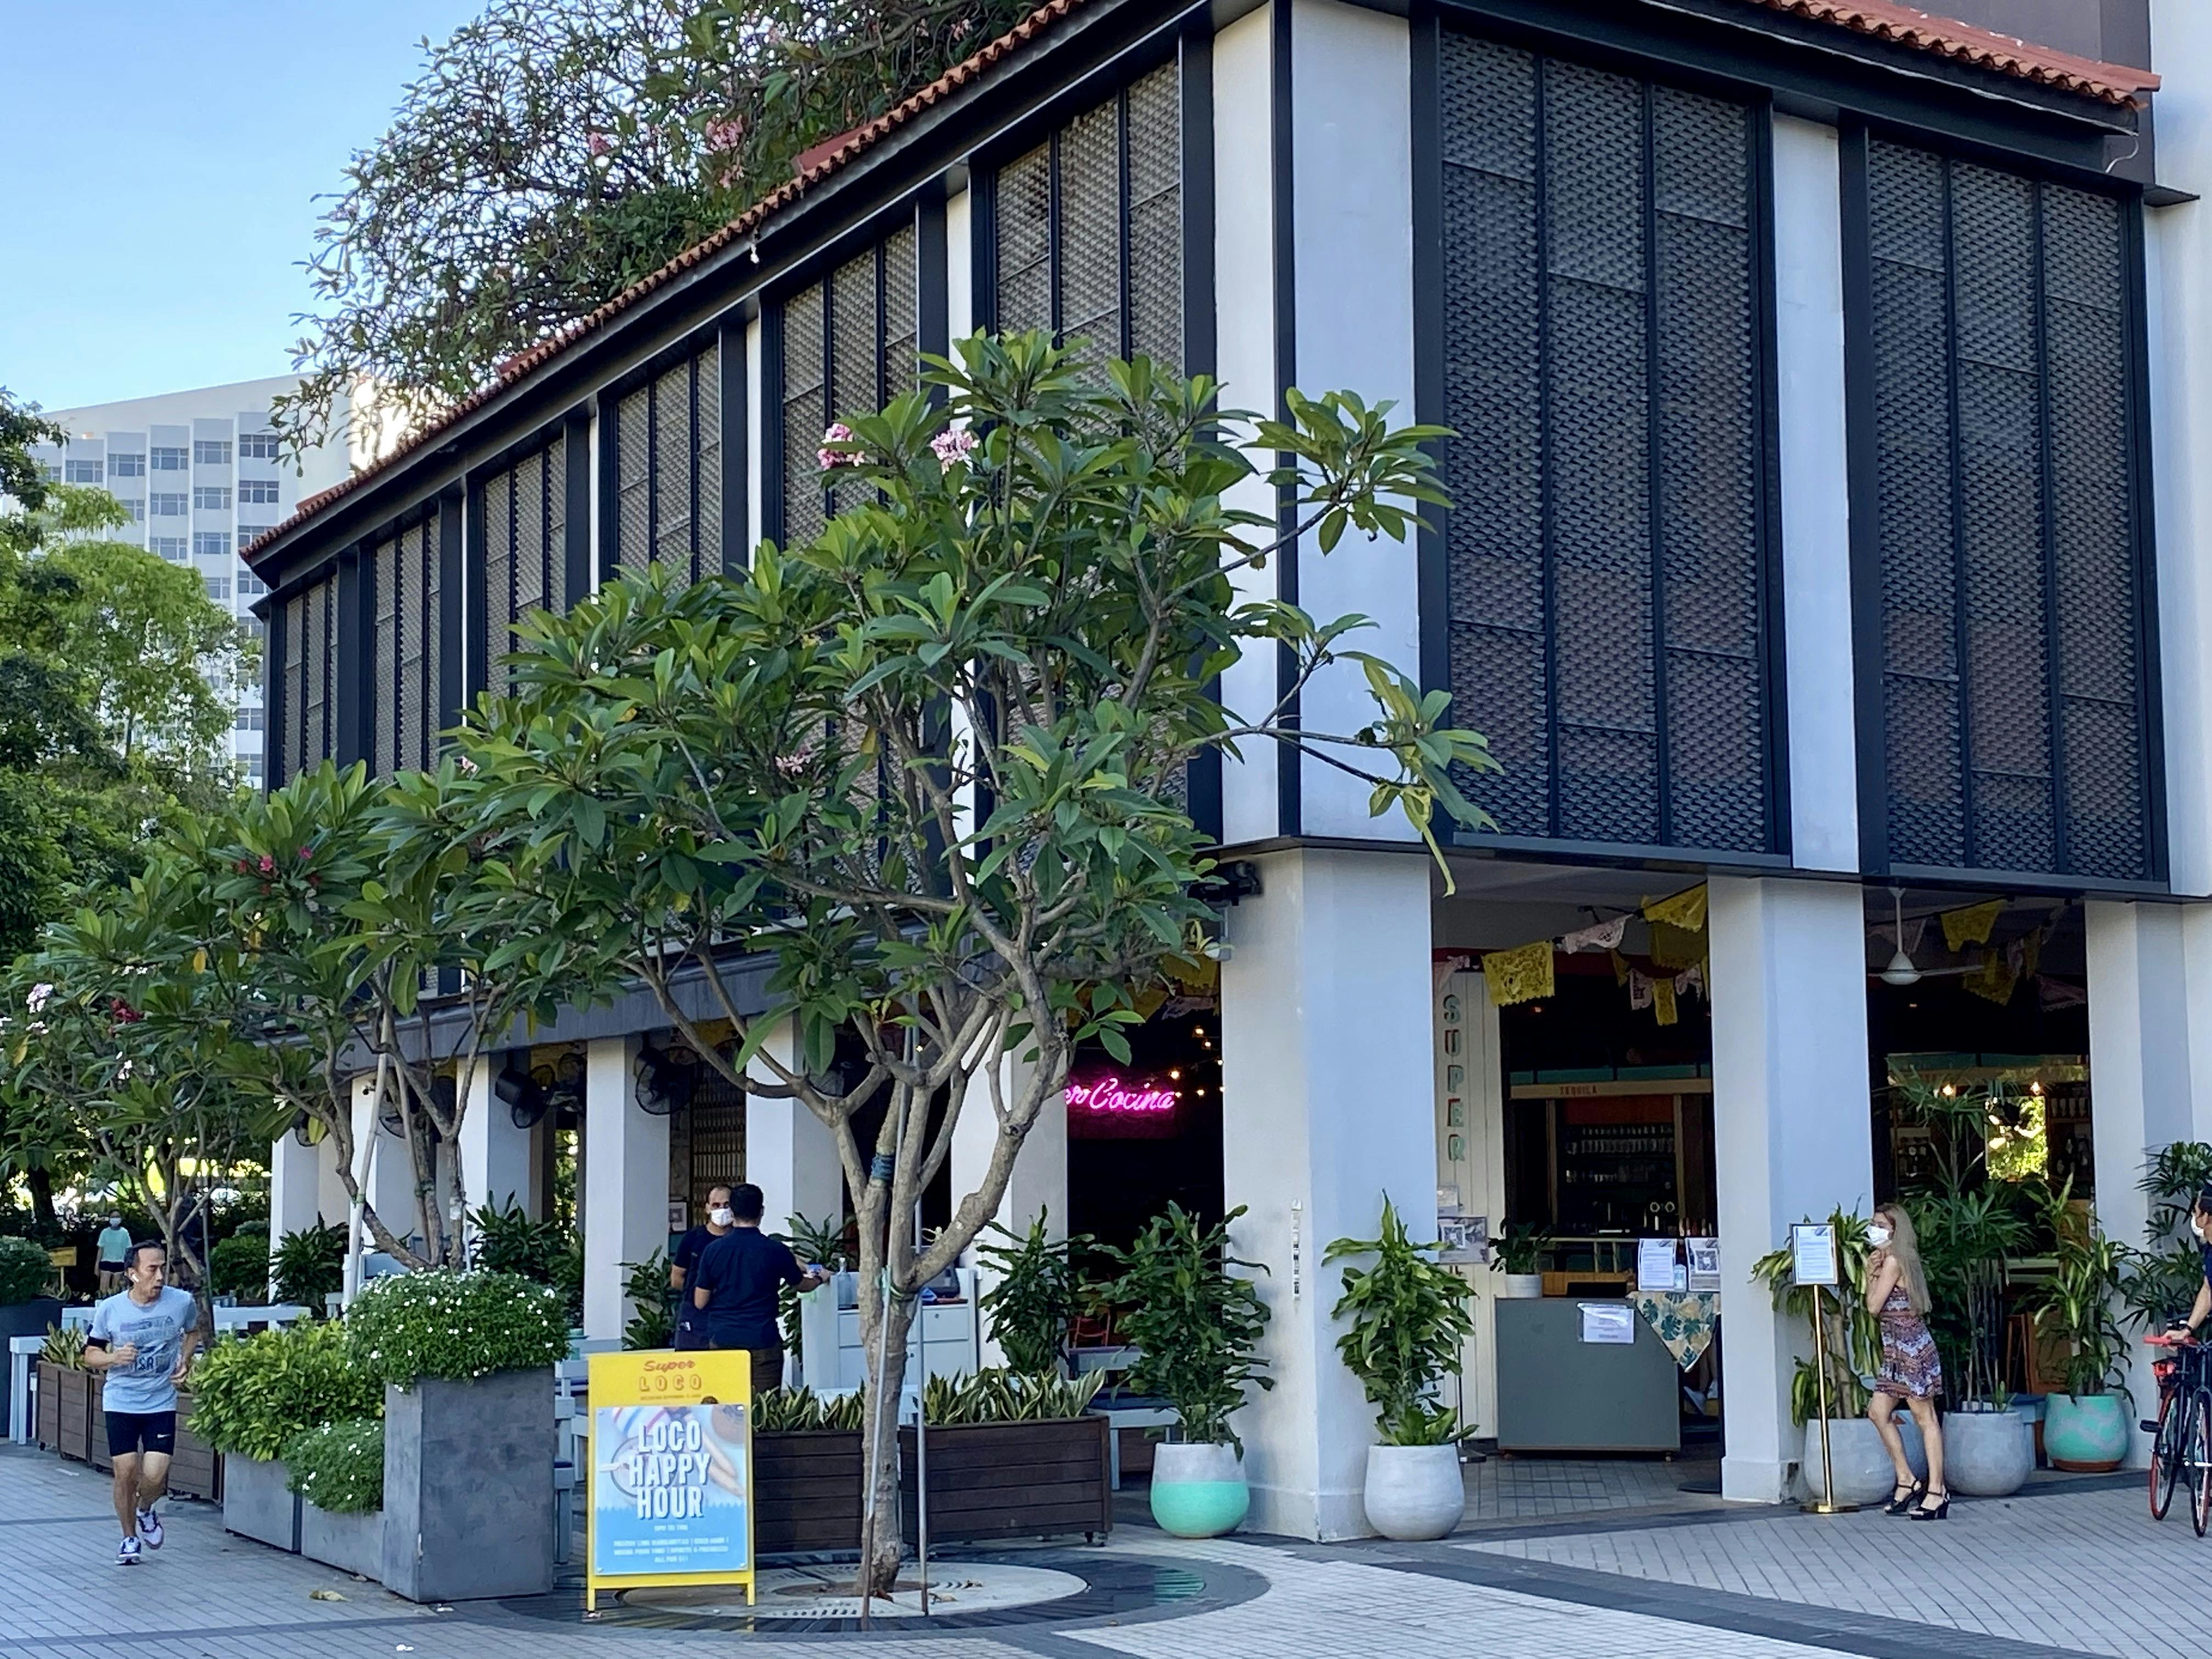 Cafes, restaurants, and bard in Robertson Quay, Singapore